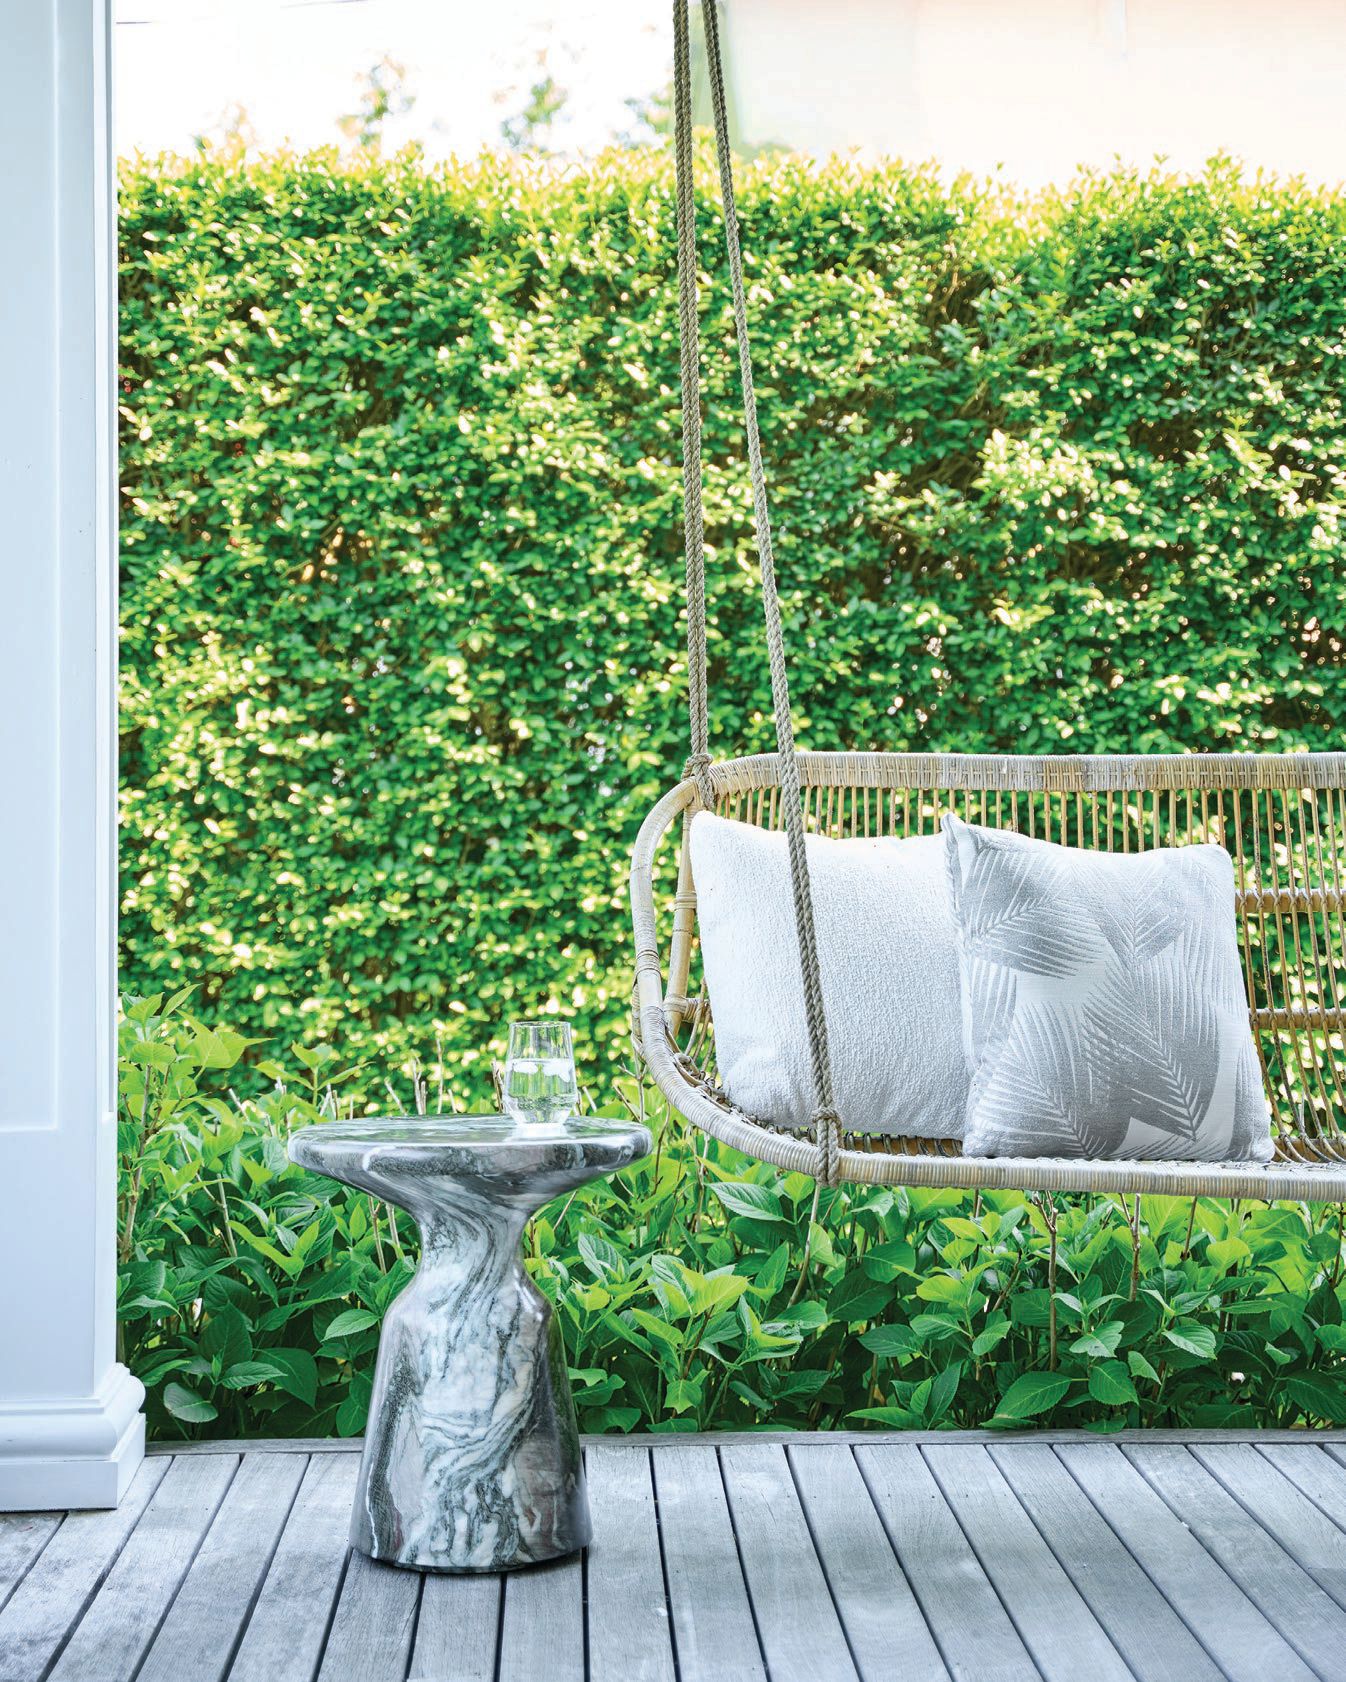 A porch swing completes the outdoor patio. PHOTOGRAPHED BY MARCO RICCA